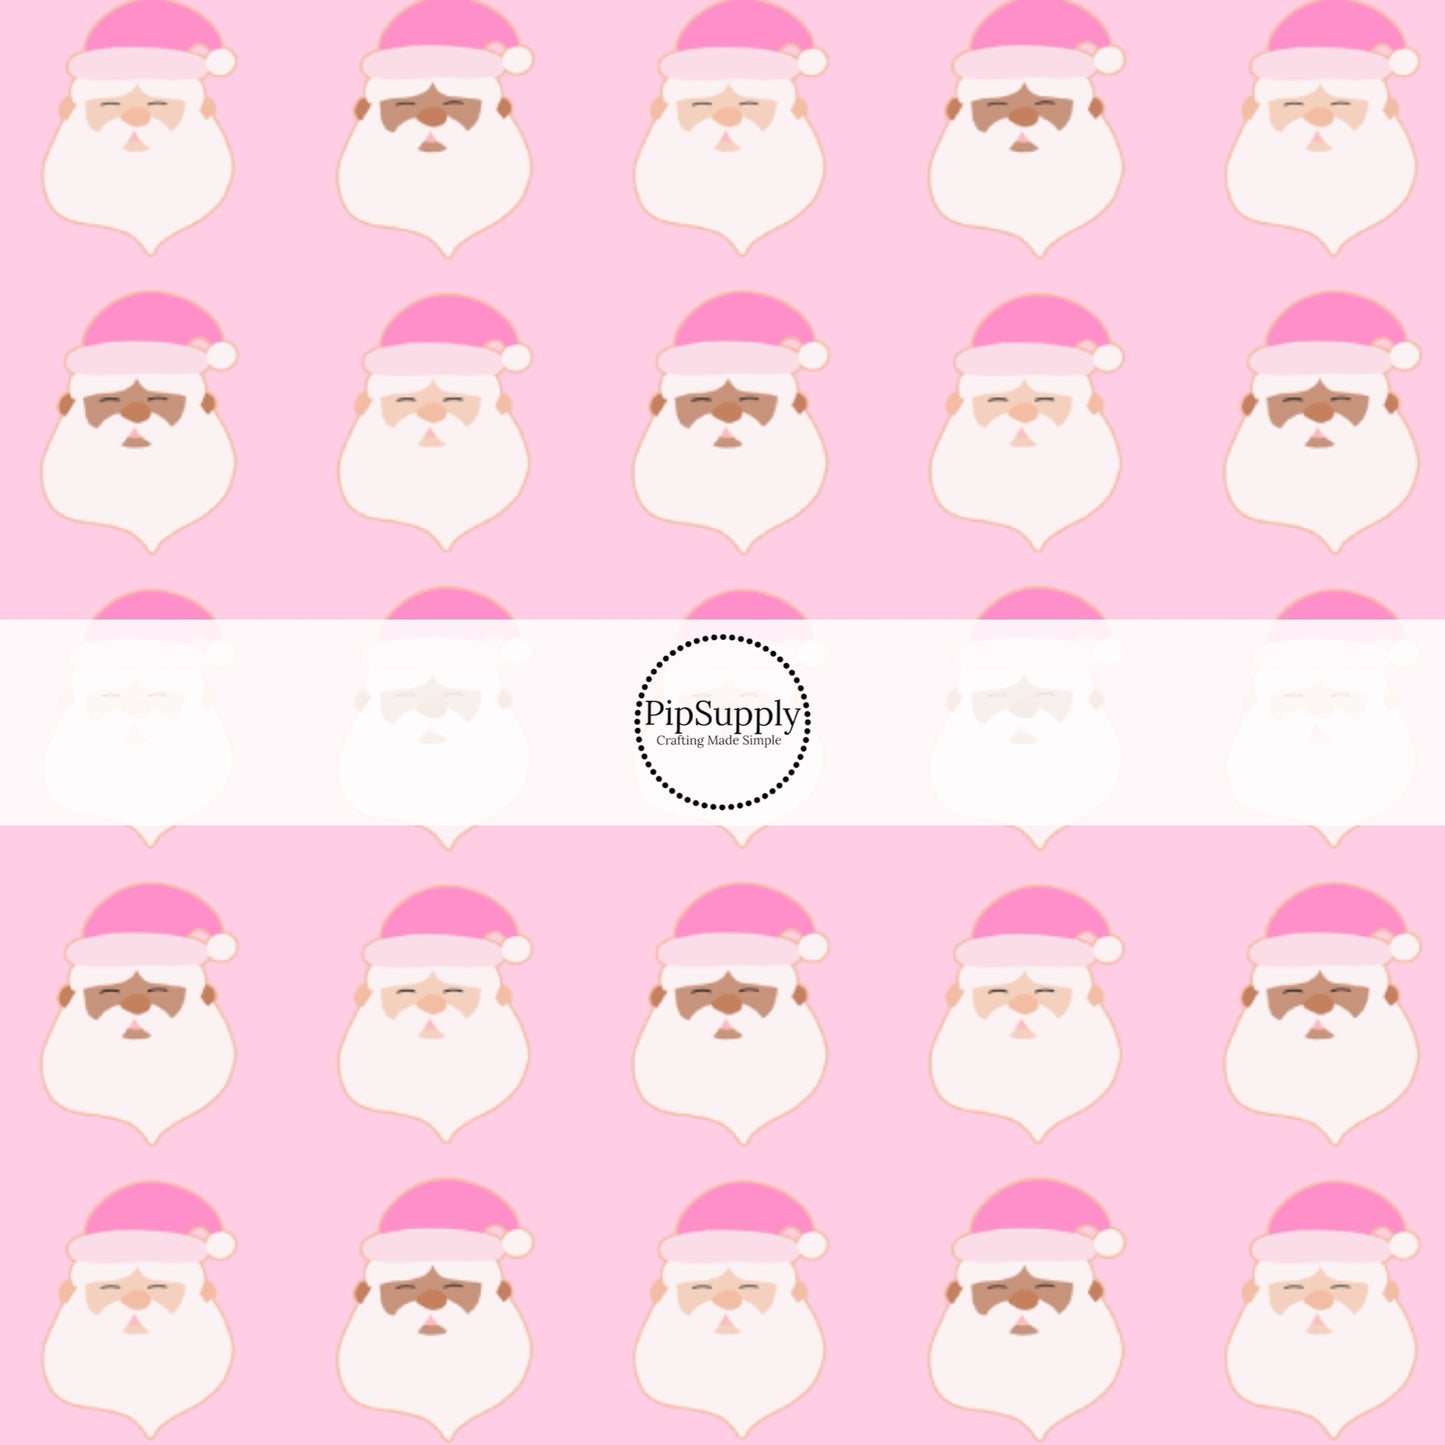 These holiday pattern themed fabric by the yard features Santas with pink Christmas hats on light pink. This fun Christmas fabric can be used for all your sewing and crafting needs!